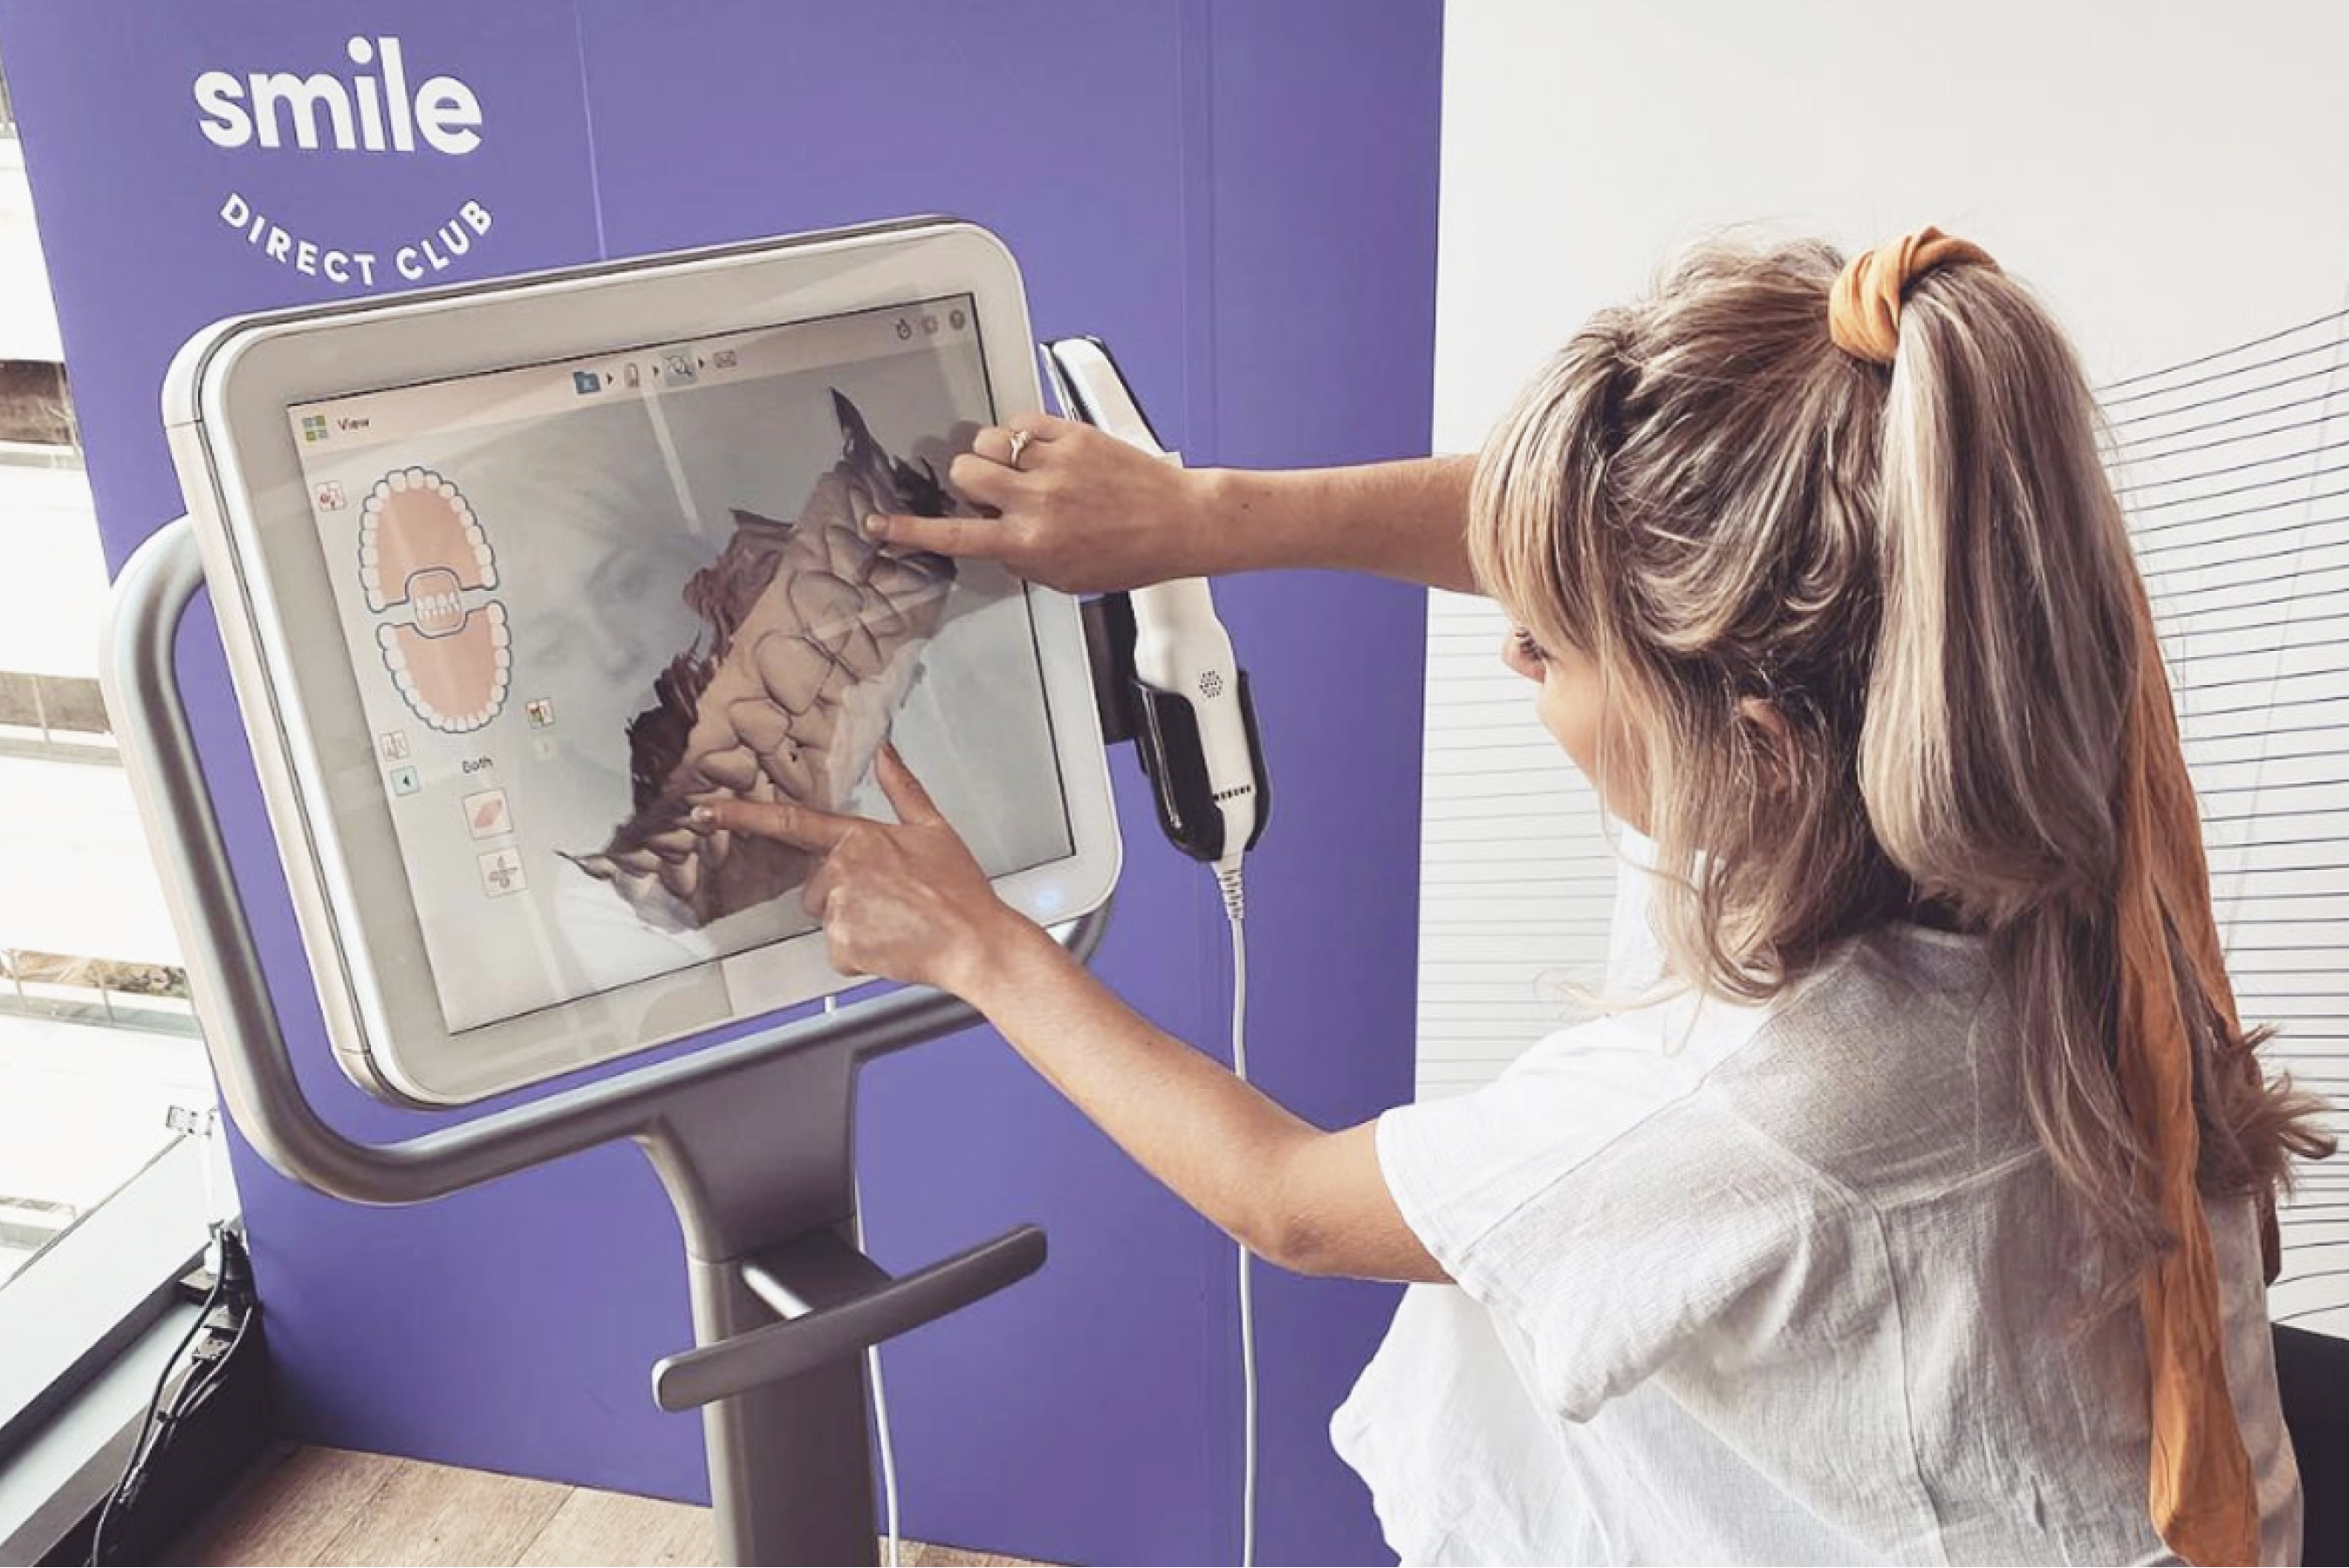 Blonde woman on white blouse and ponytail zooming her smile 3D scan at a Smileshop